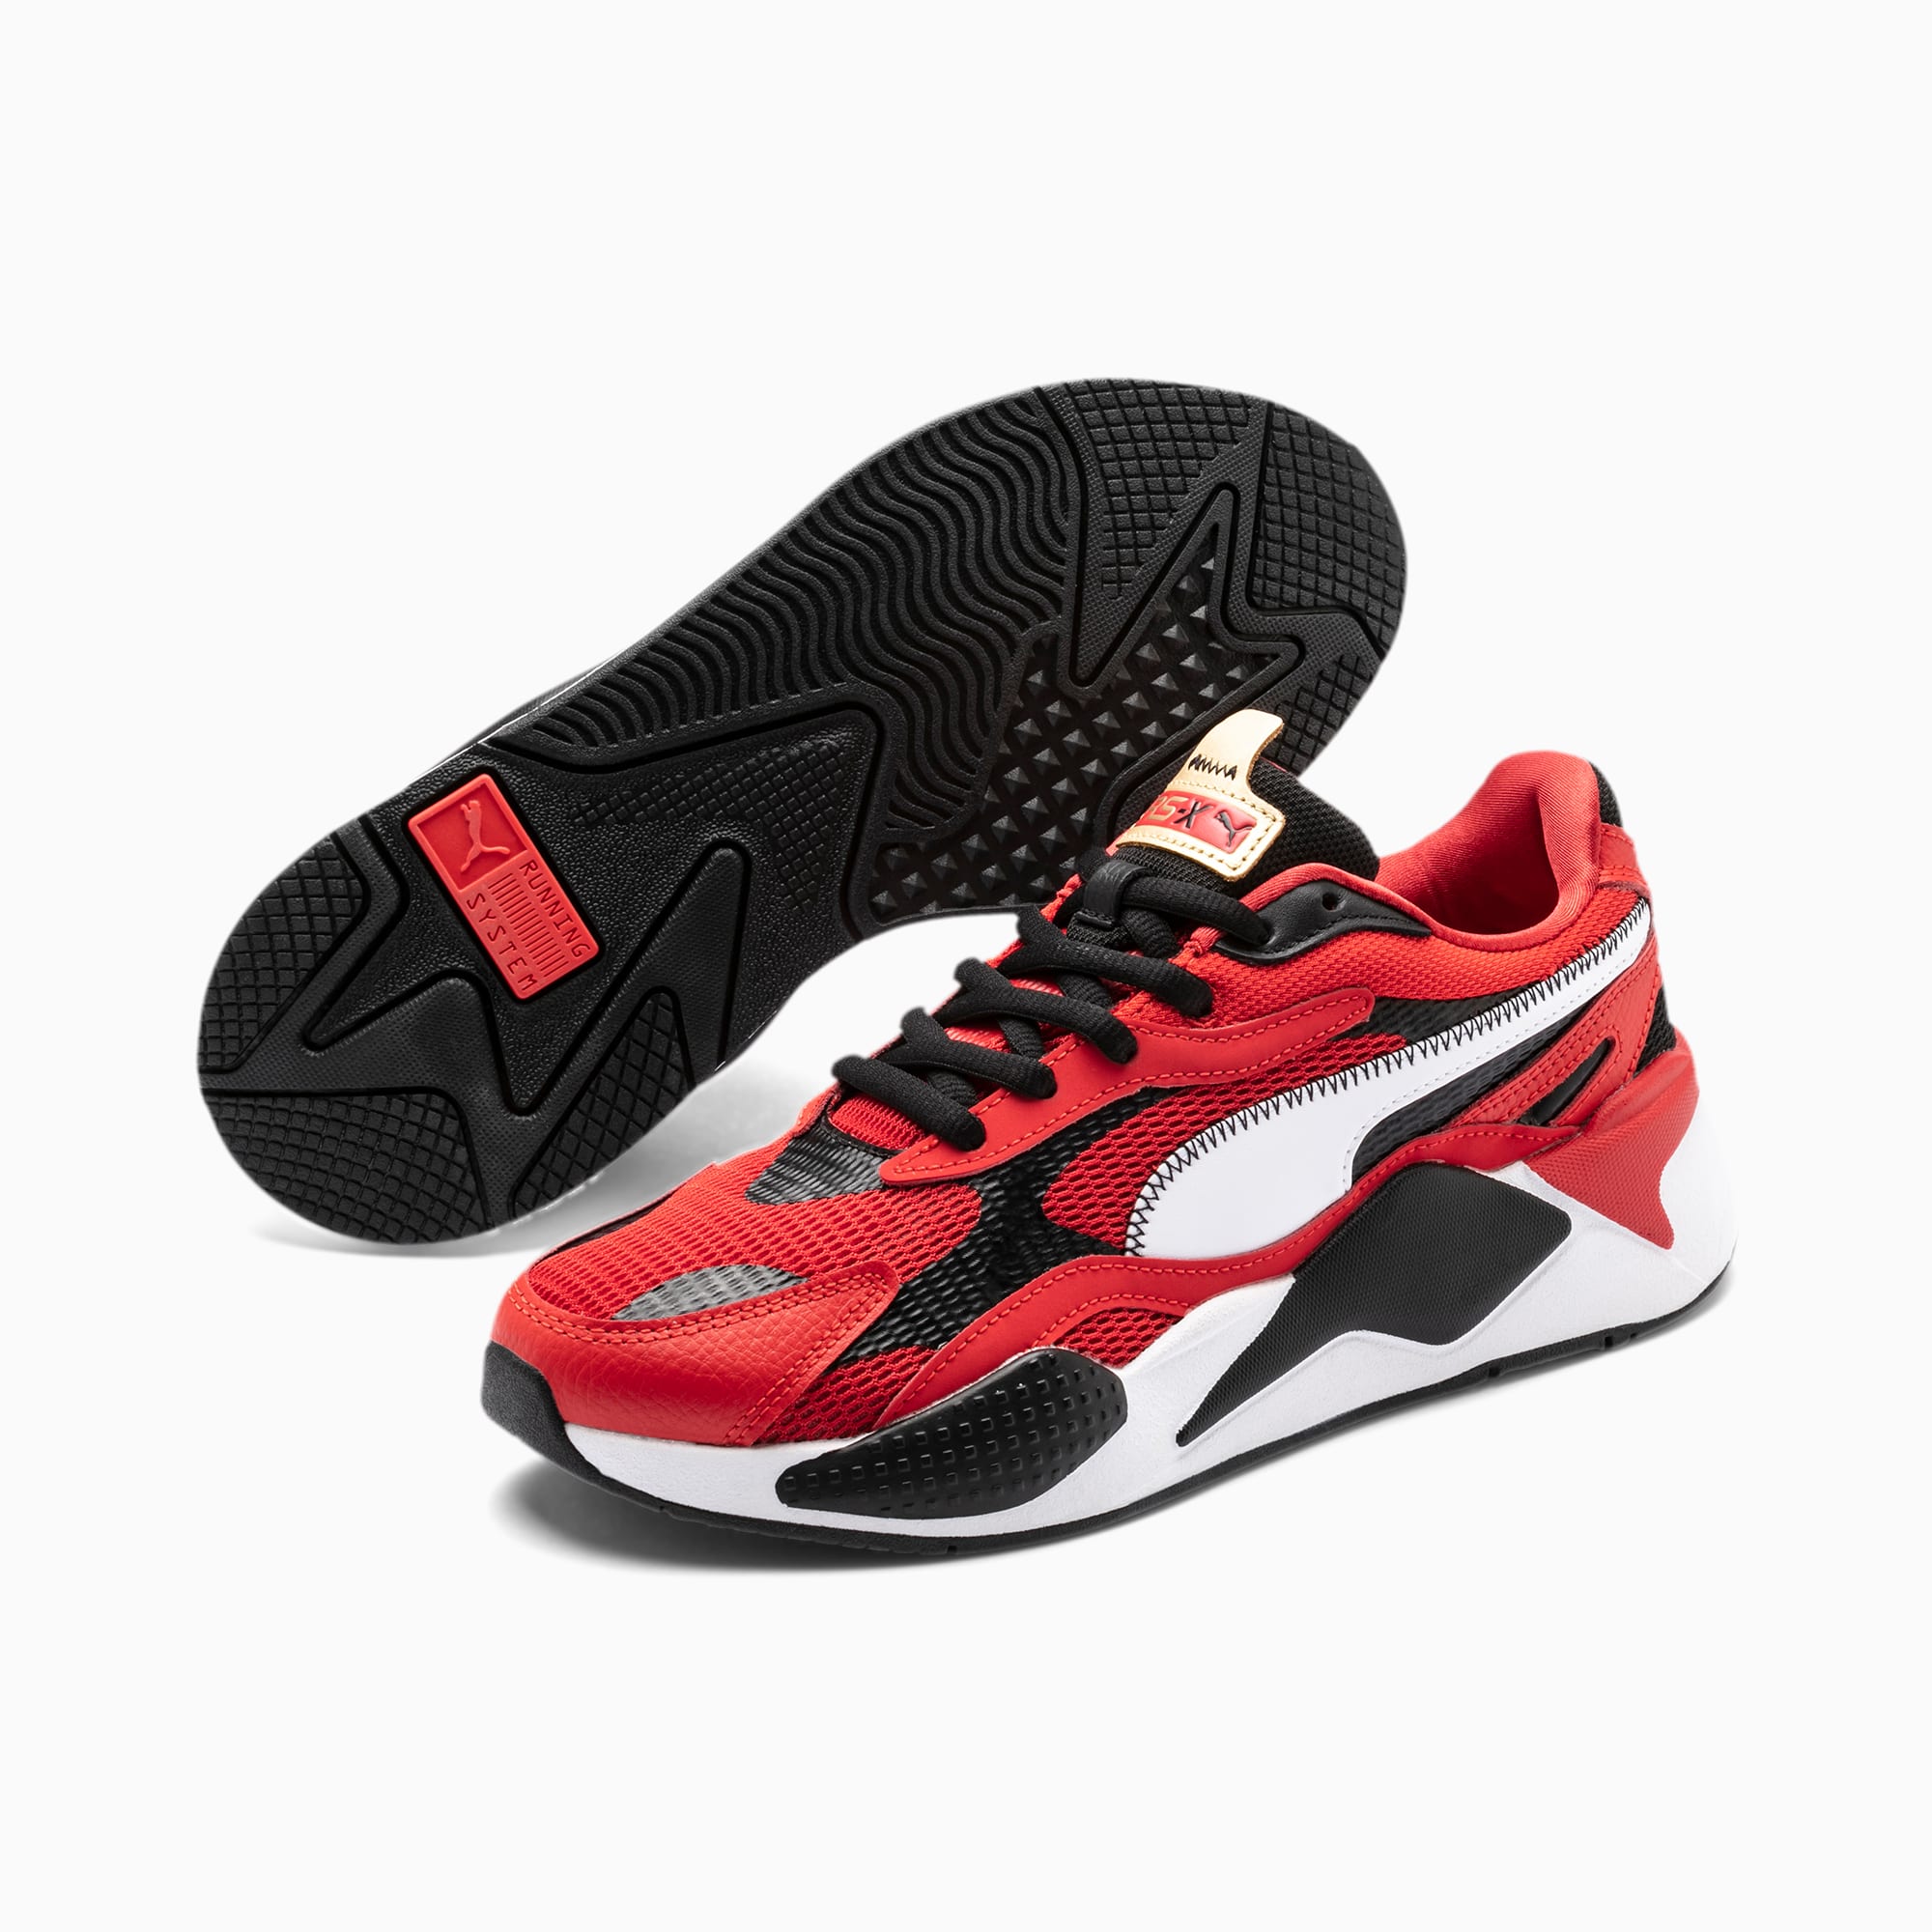 RS-X³ Chinese New Year Men's Sneakers | PUMA